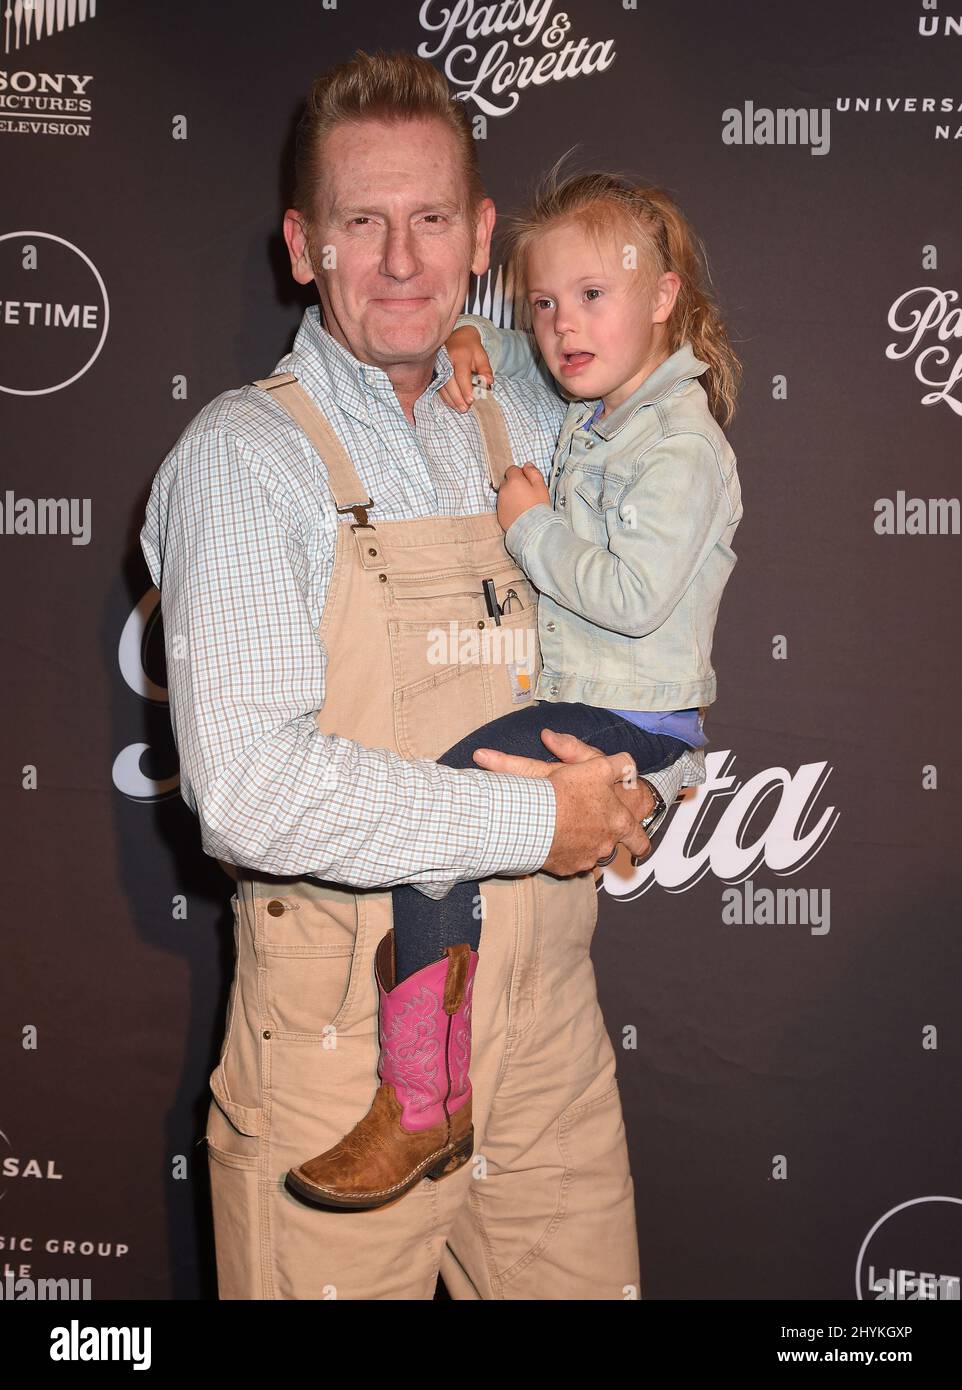 Rory Feek and Indiana Feek at the Lifetime special screening and